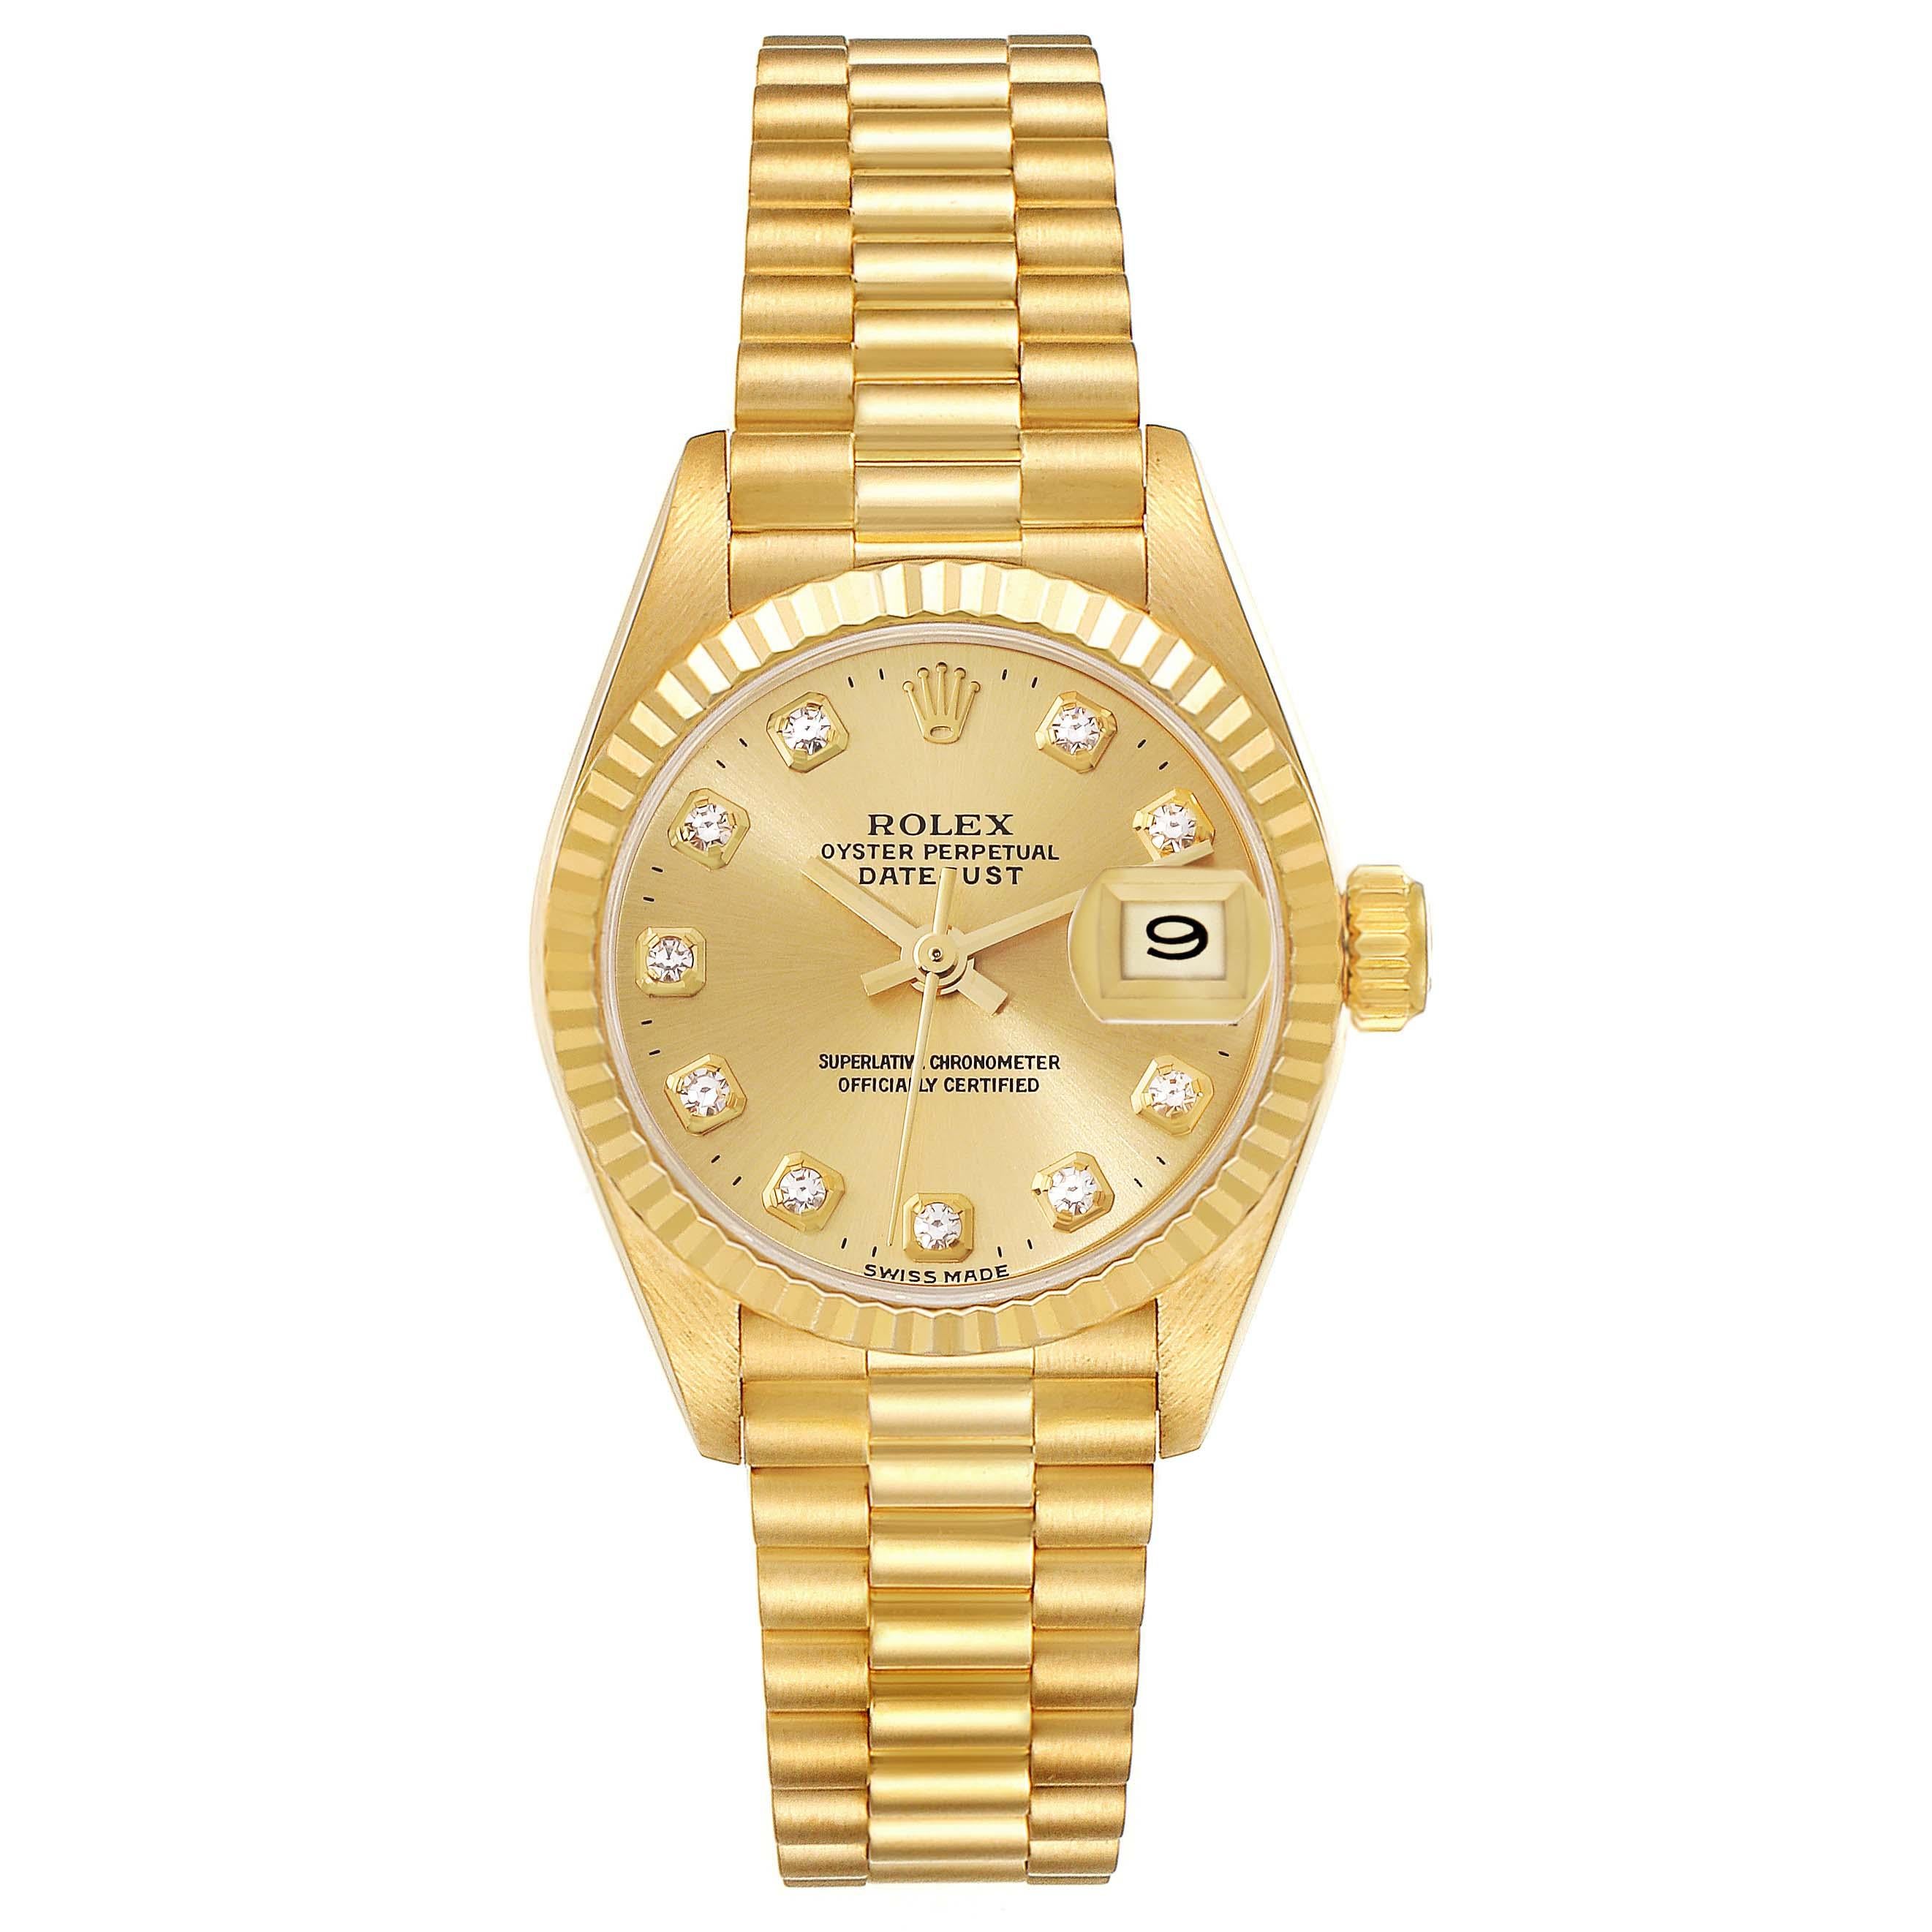 Rolex Datejust President Diamond Dial Yellow Gold Ladies Watch 69178 Papers. Officially certified chronometer automatic self-winding movement. 18k yellow gold oyster case 26.0 mm in diameter. Rolex logo on the crown. 18k yellow gold fluted bezel.